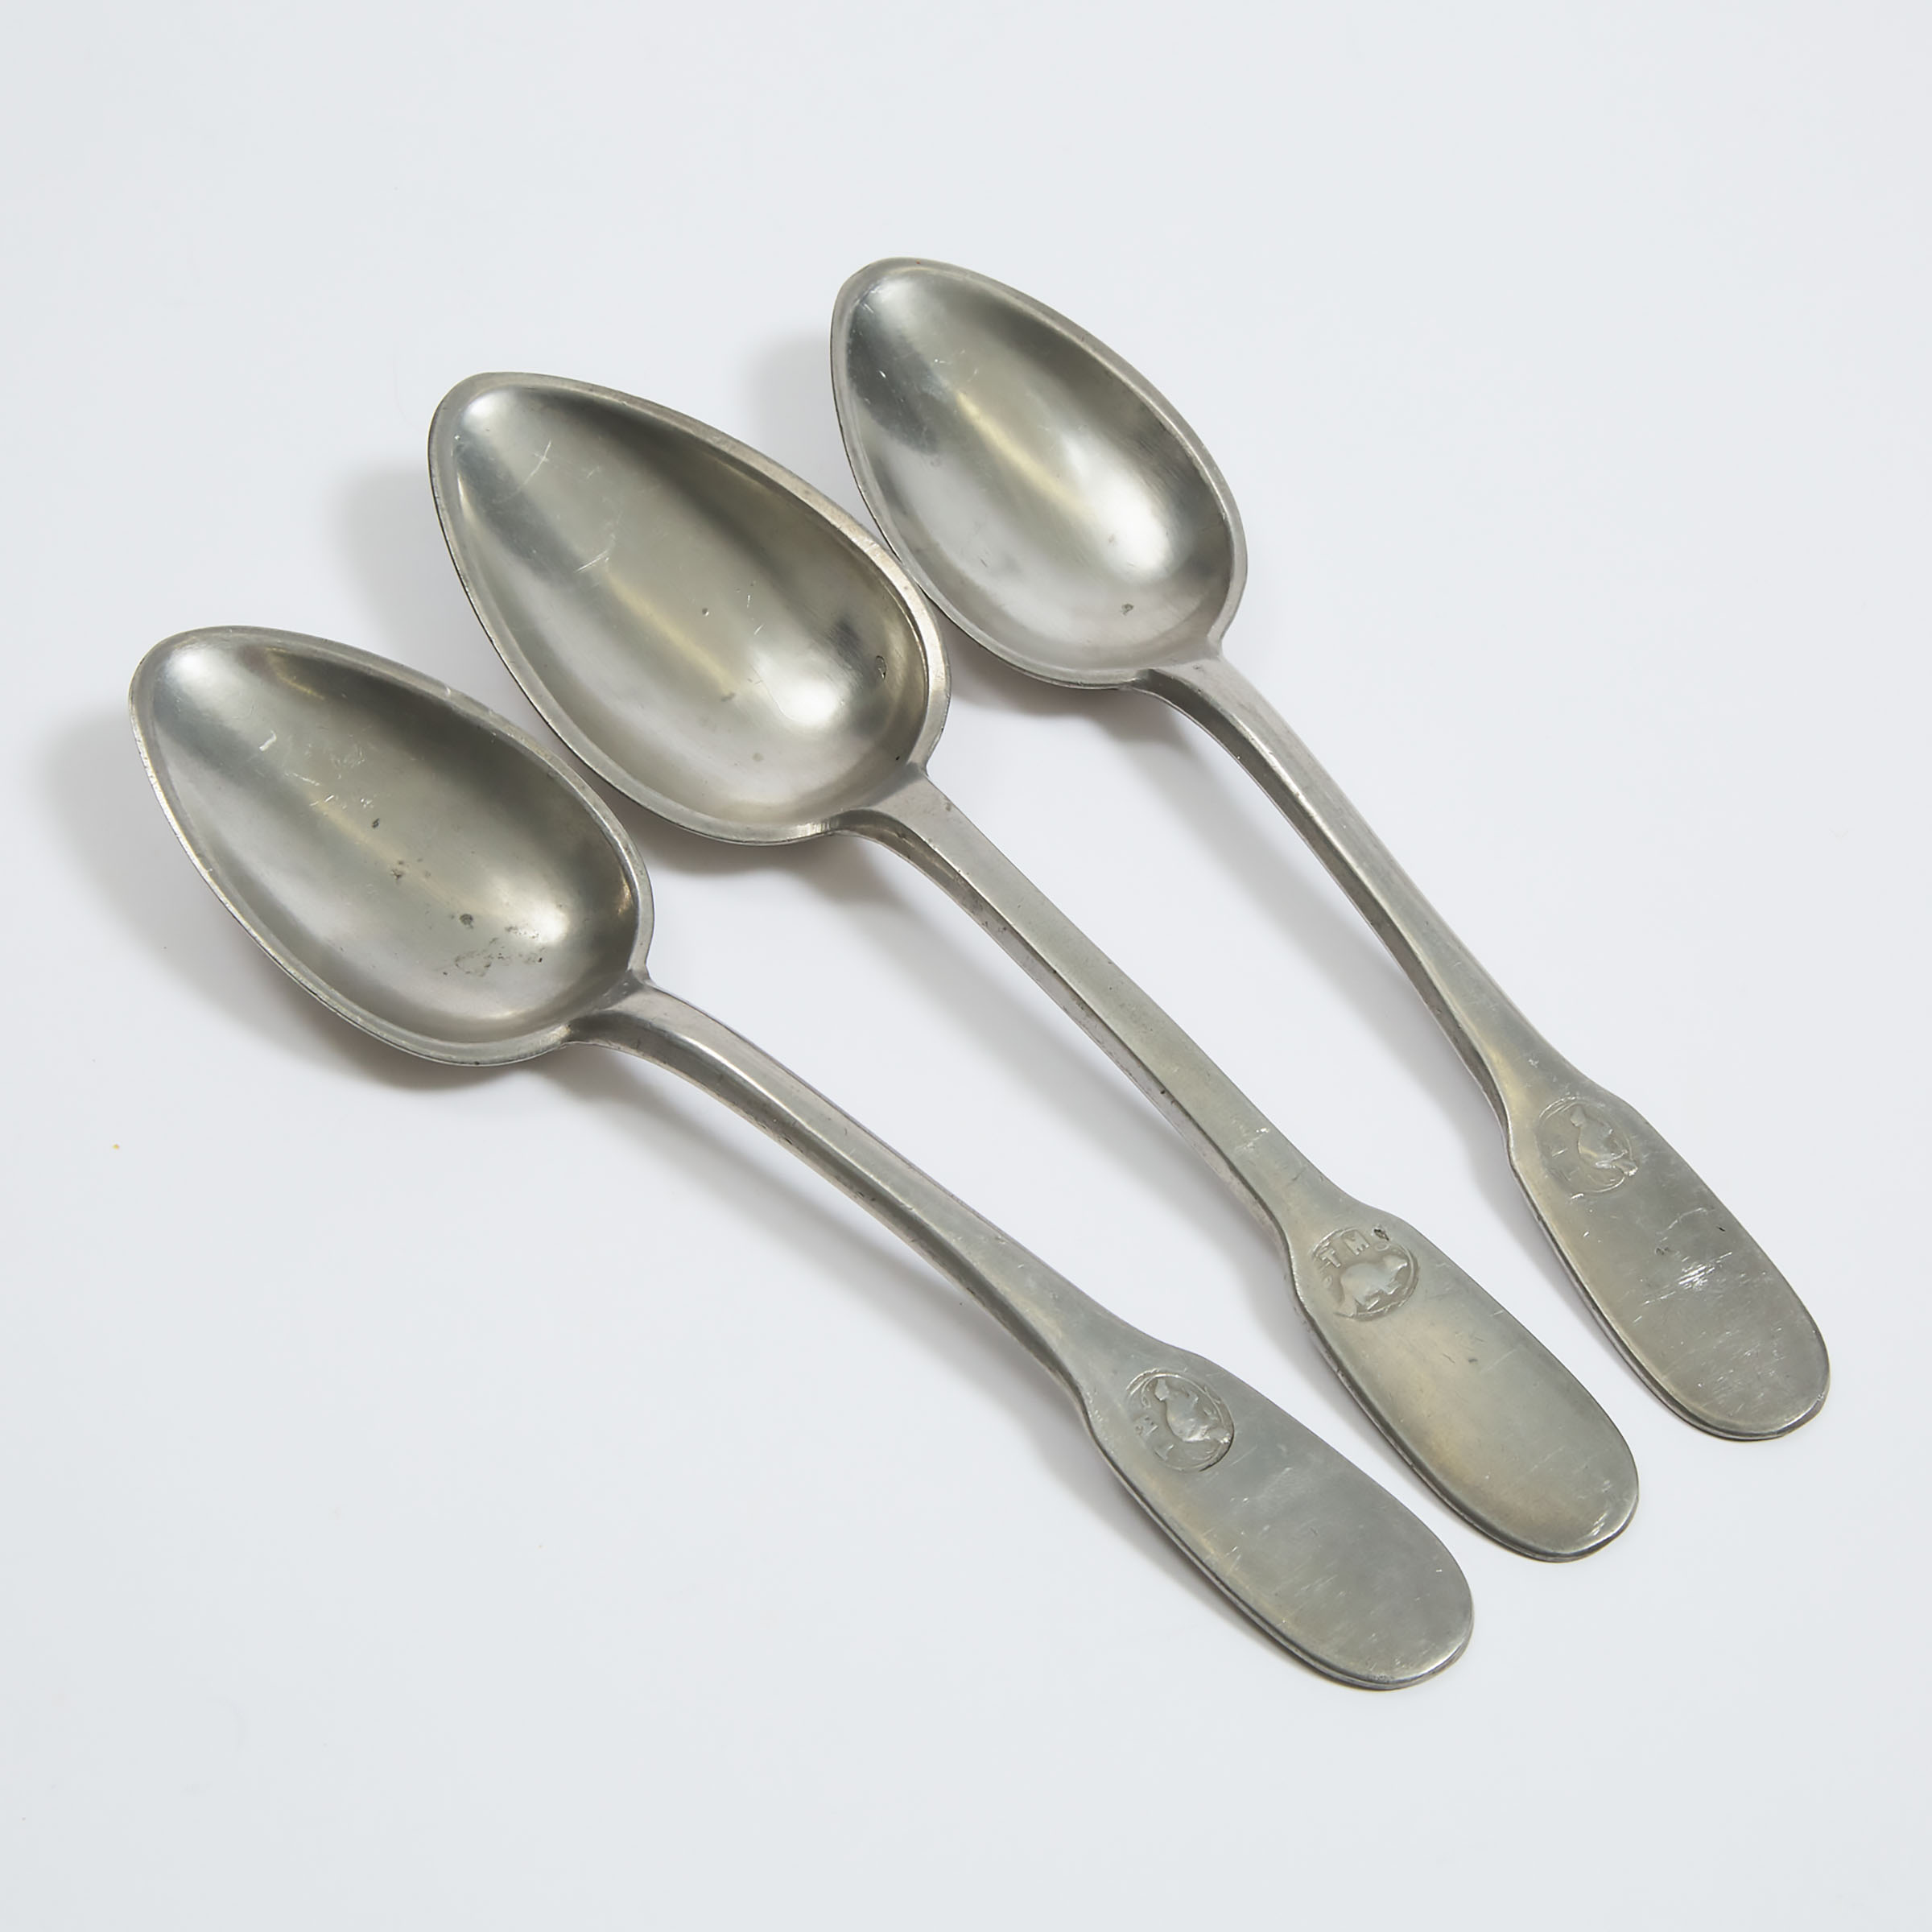 Three Canadian Pewter Table Spoons, Thomas Menut, Montreal, early 19th century